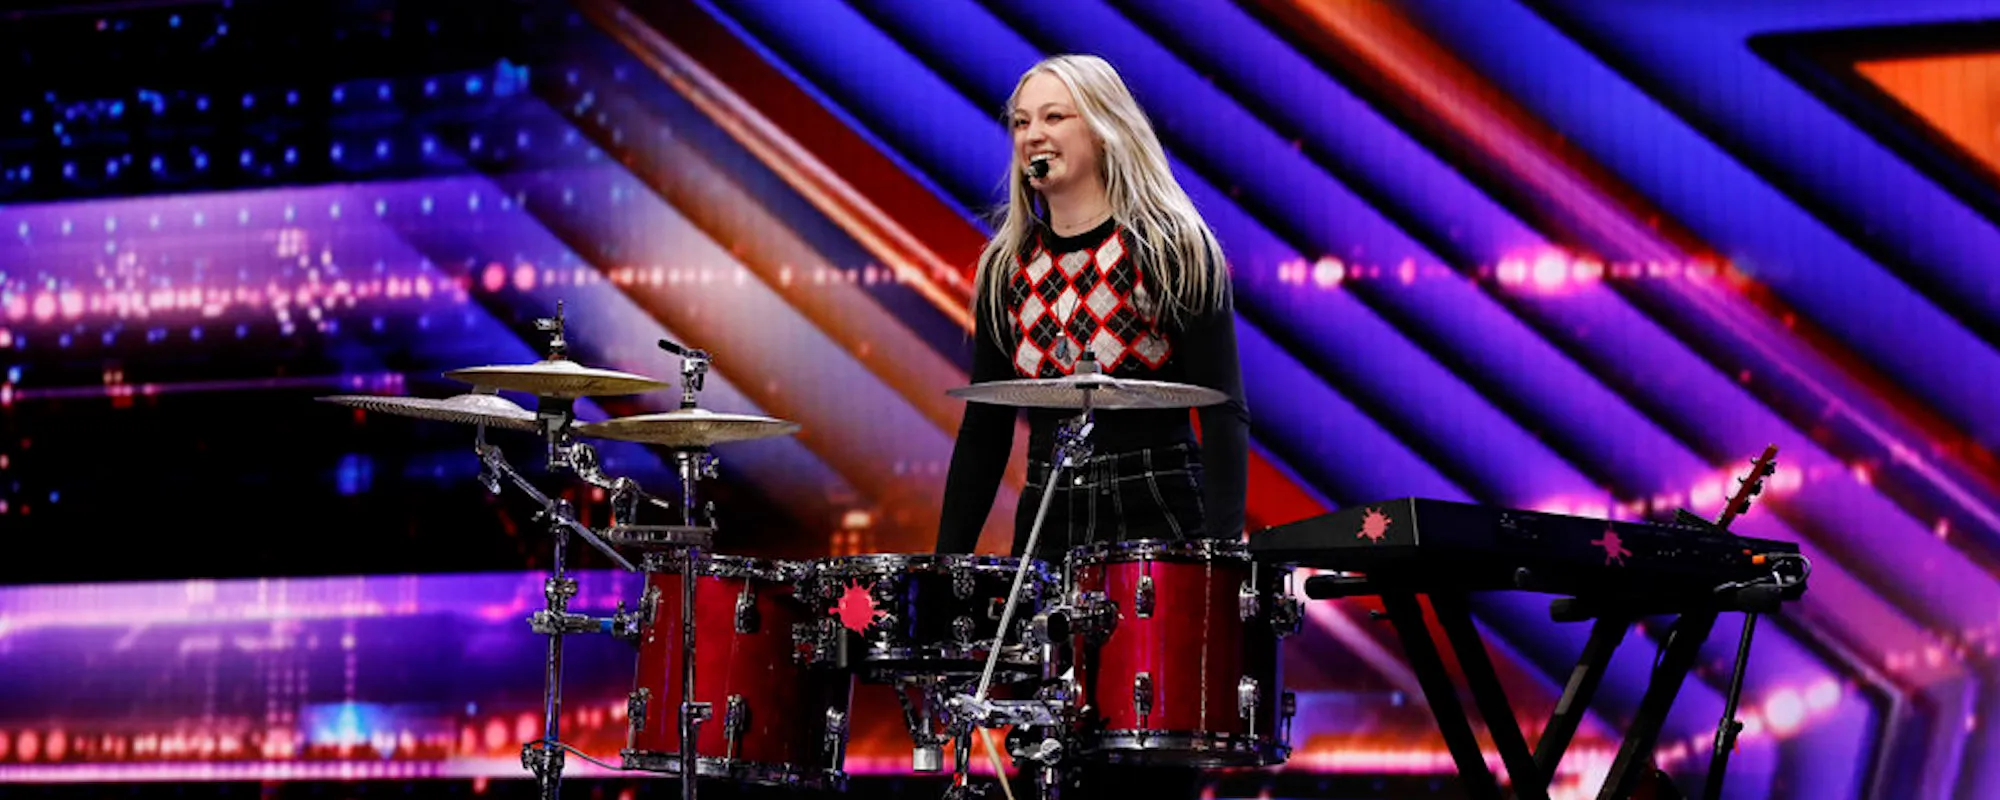 3 Things to Know About ‘America’s Got Talent’ Nashville Songwriter, One-Woman Band Mia Morris